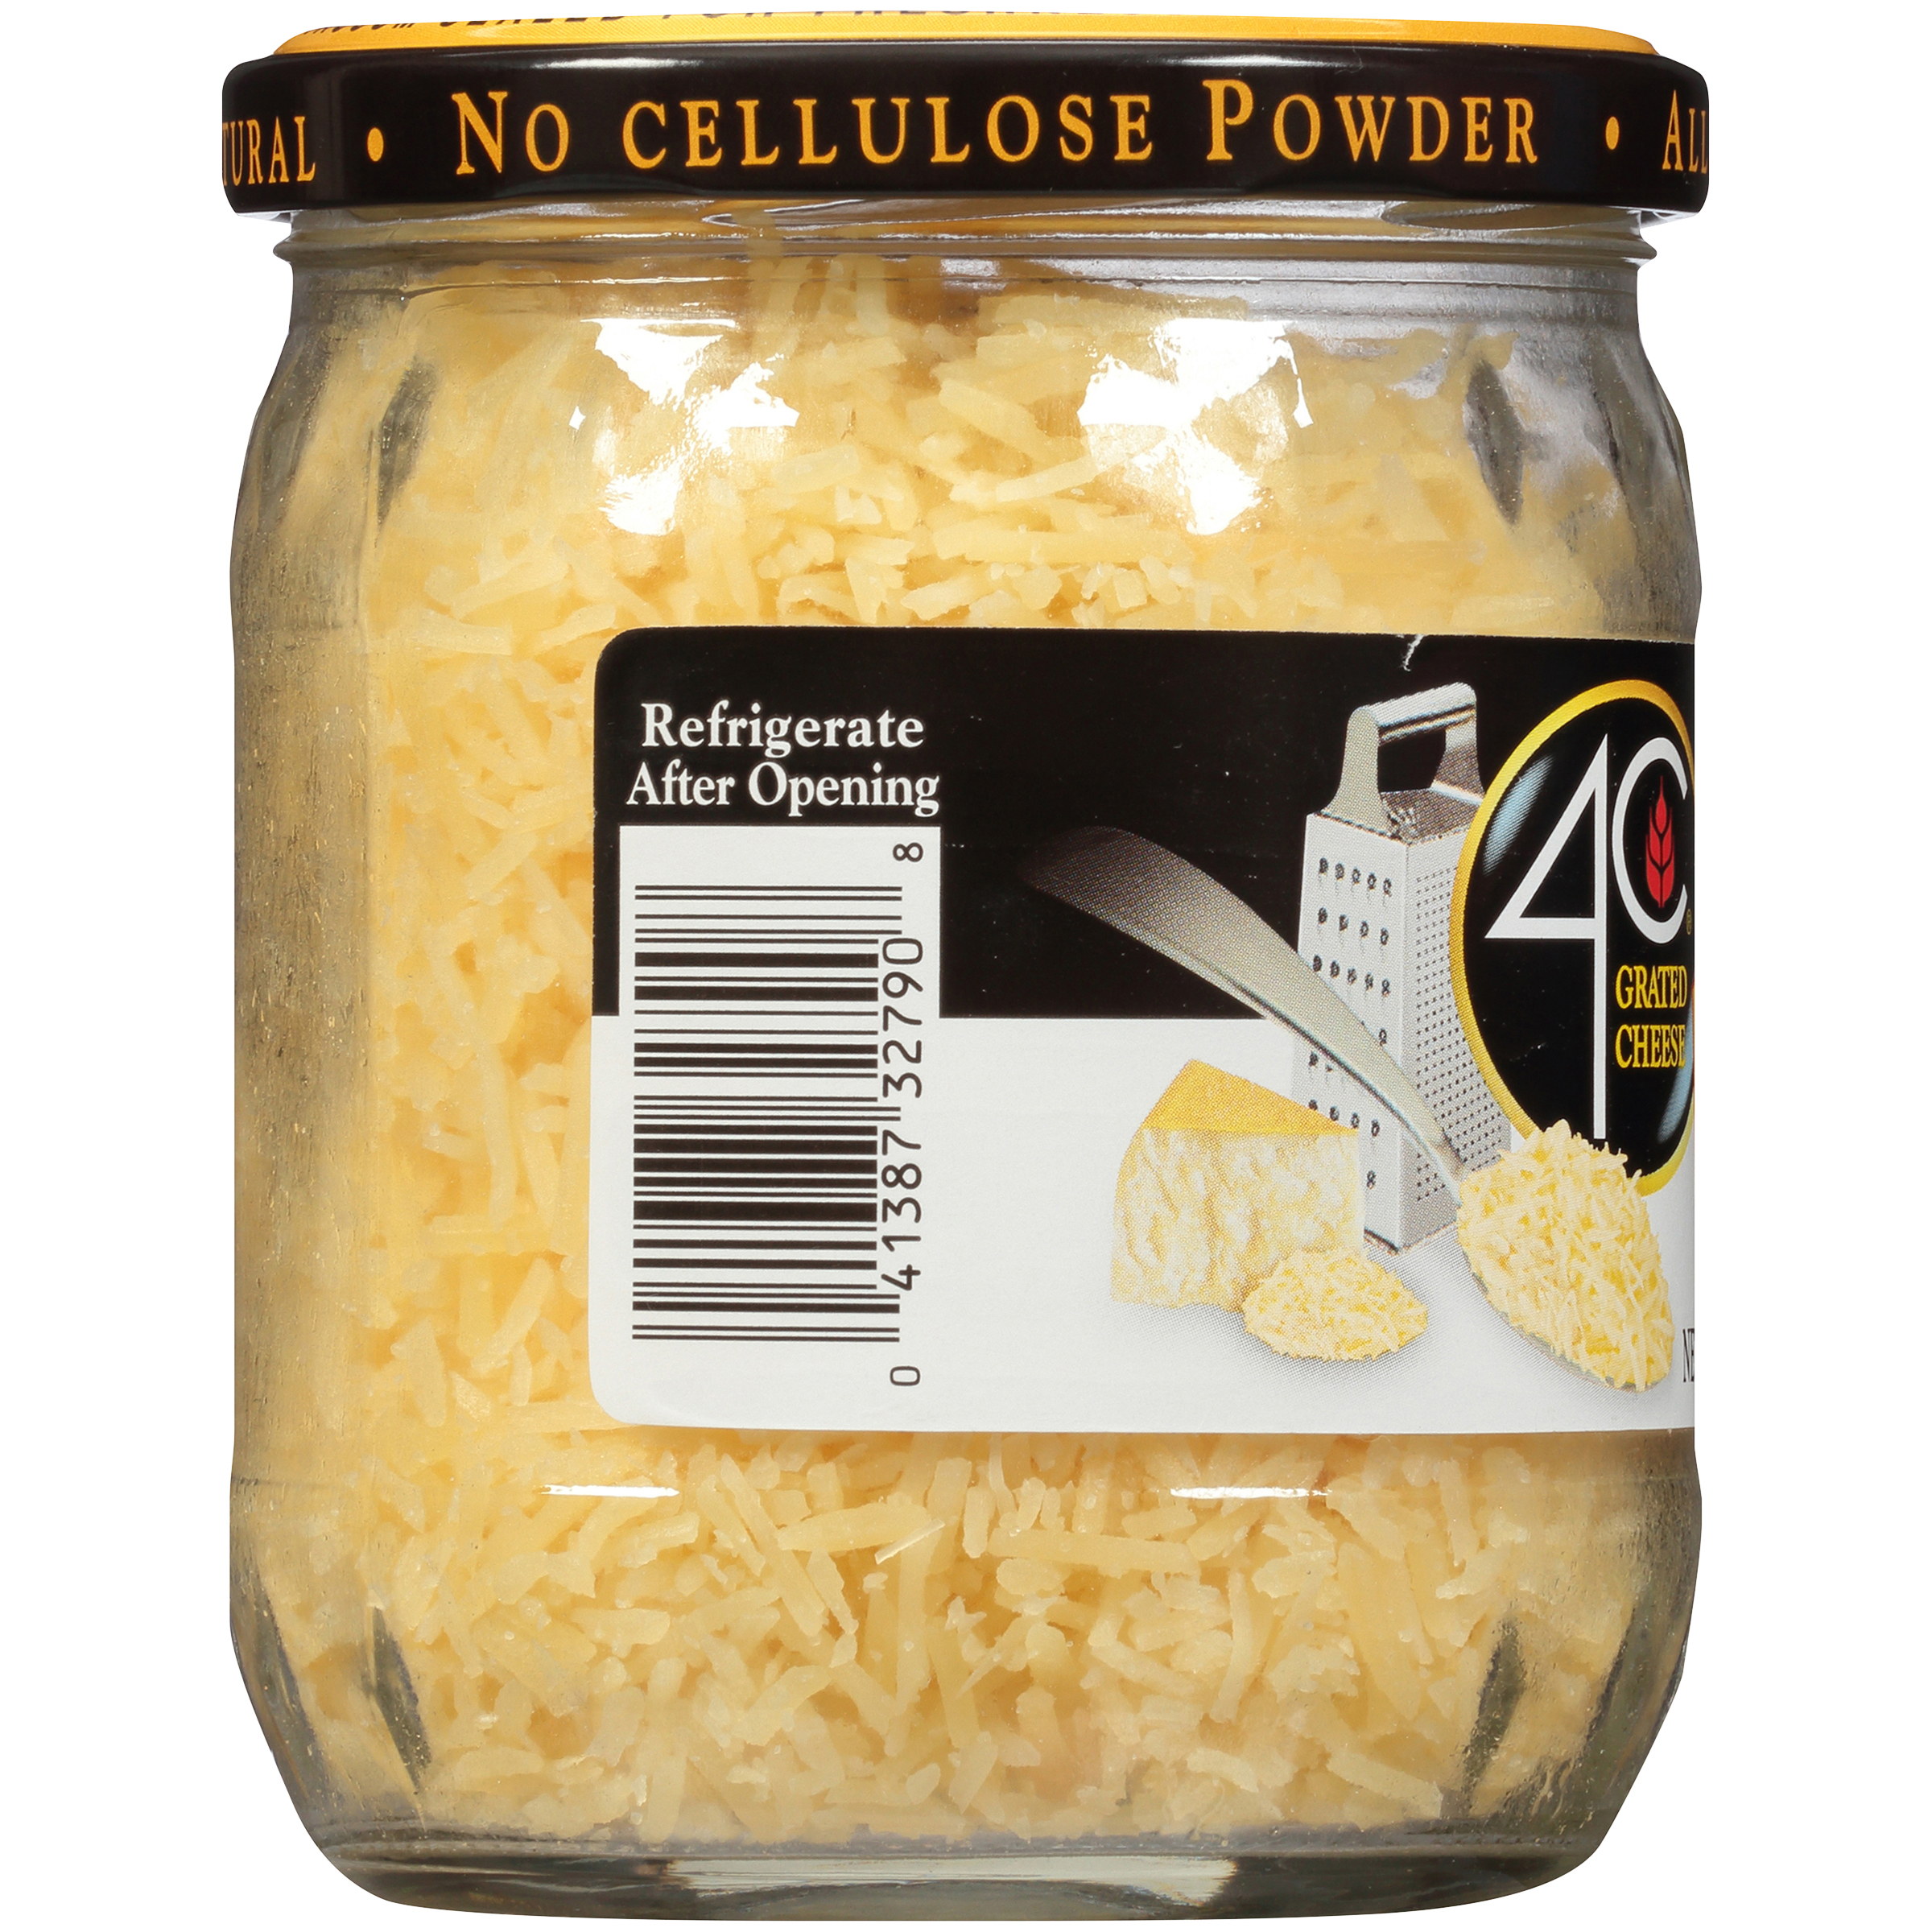 4C Homestyle Parmesan Grated Cheese 6 oz Jar - image 3 of 10